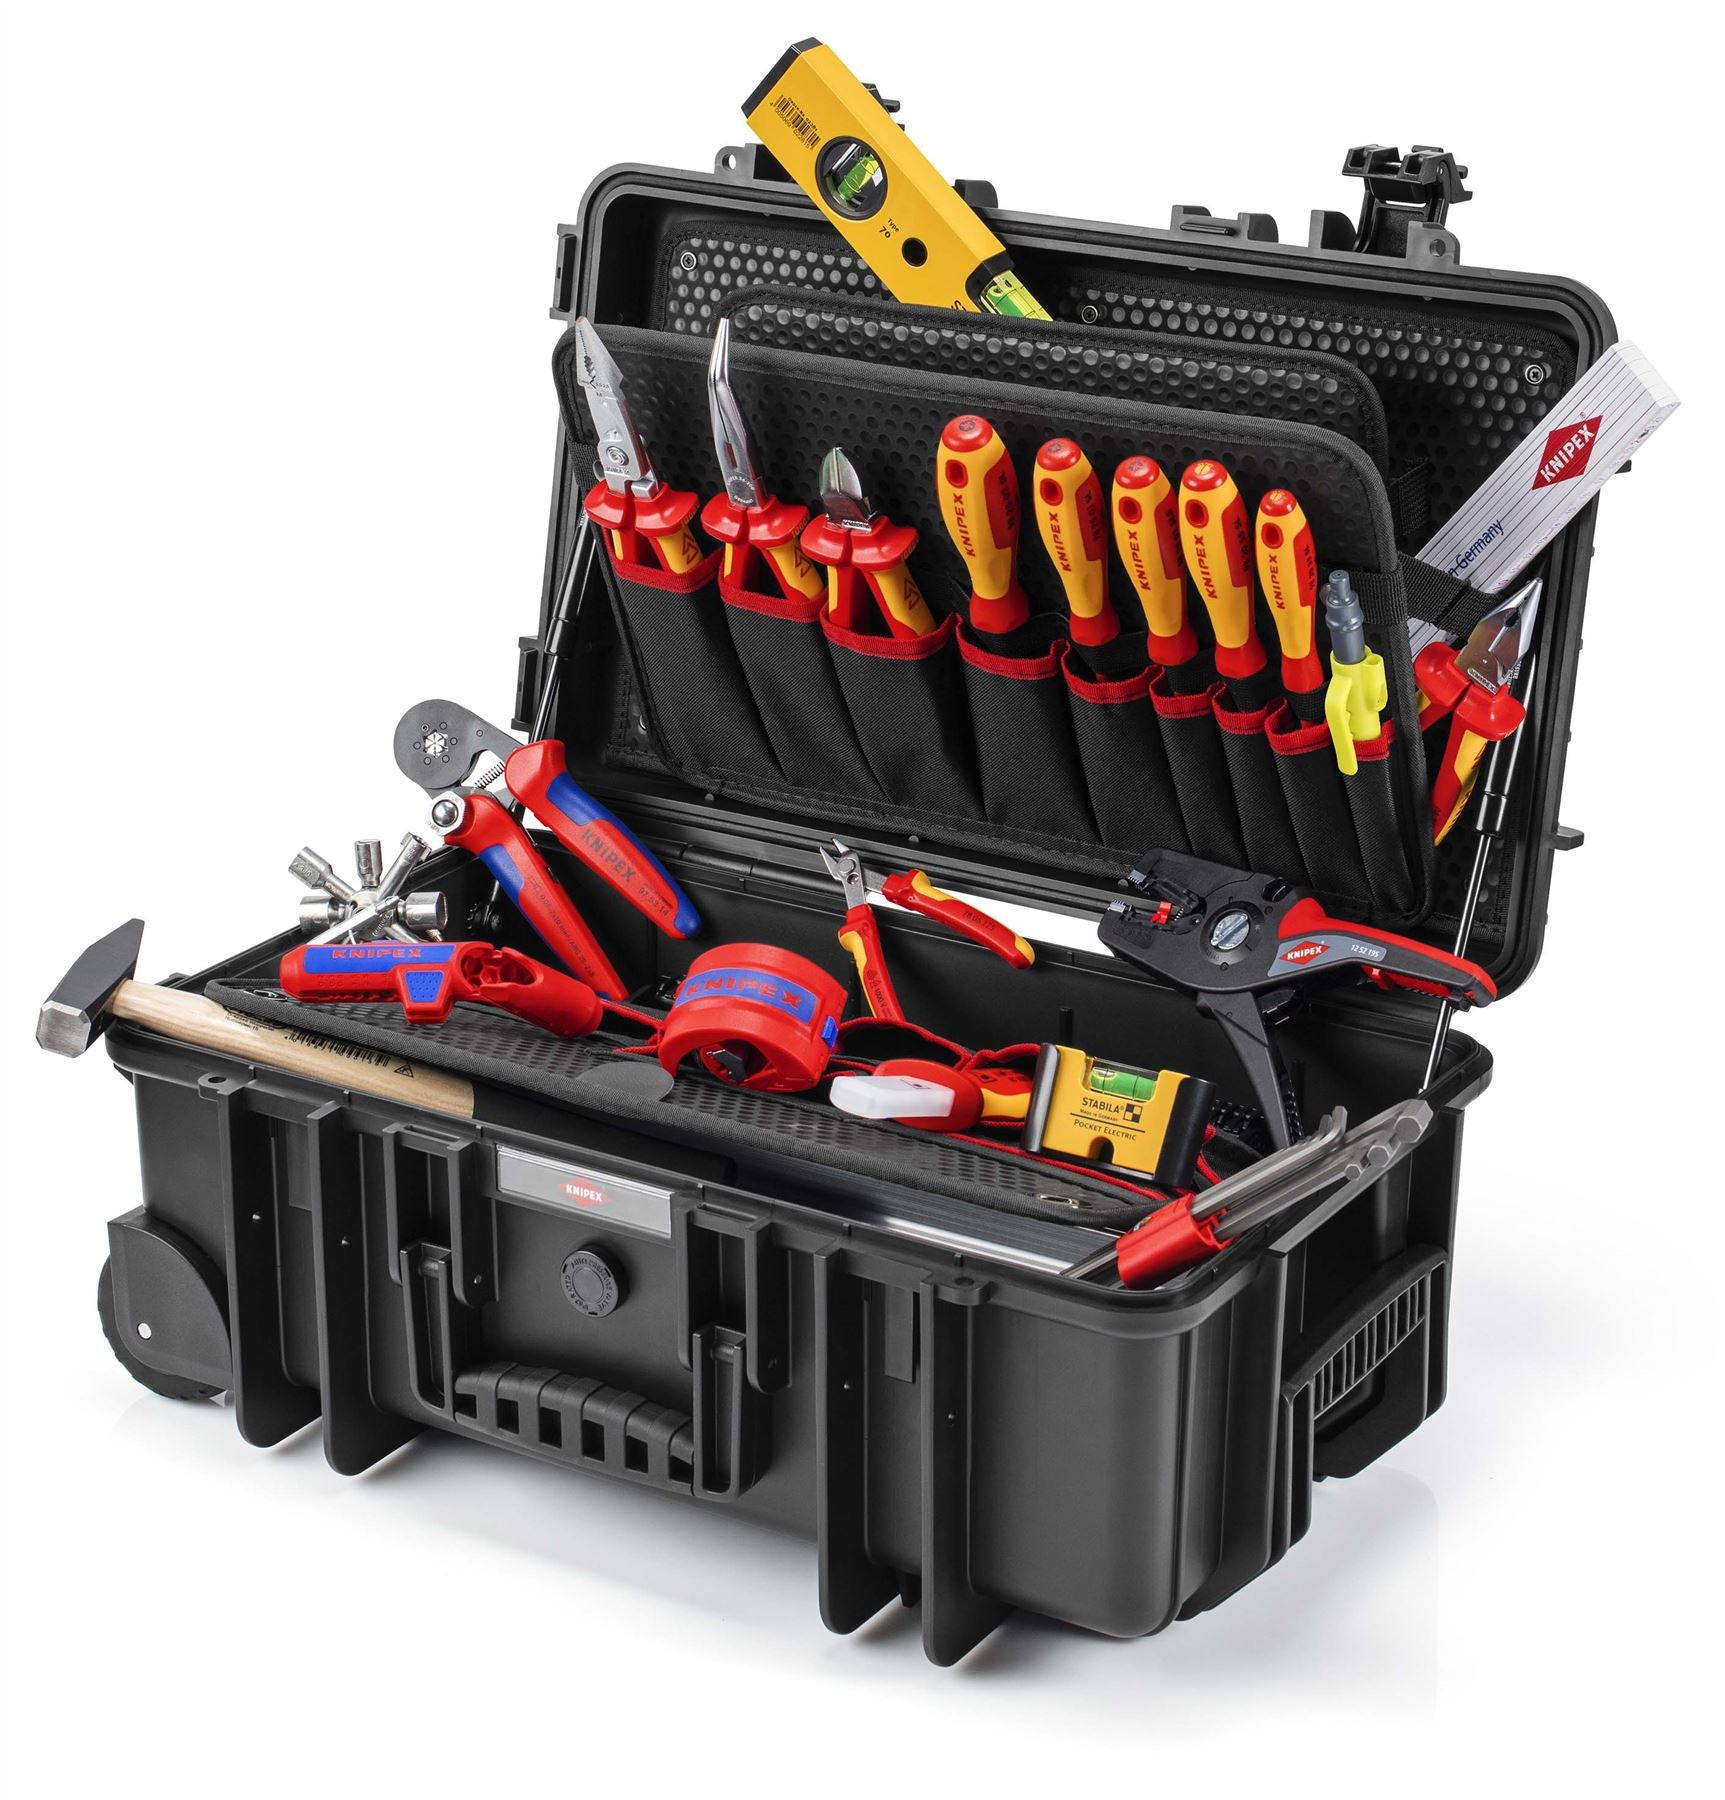 Knipex Tool Case Robust26 Electric Fit to Fly Storage Box 22 Piece Kit 00 21 33 E